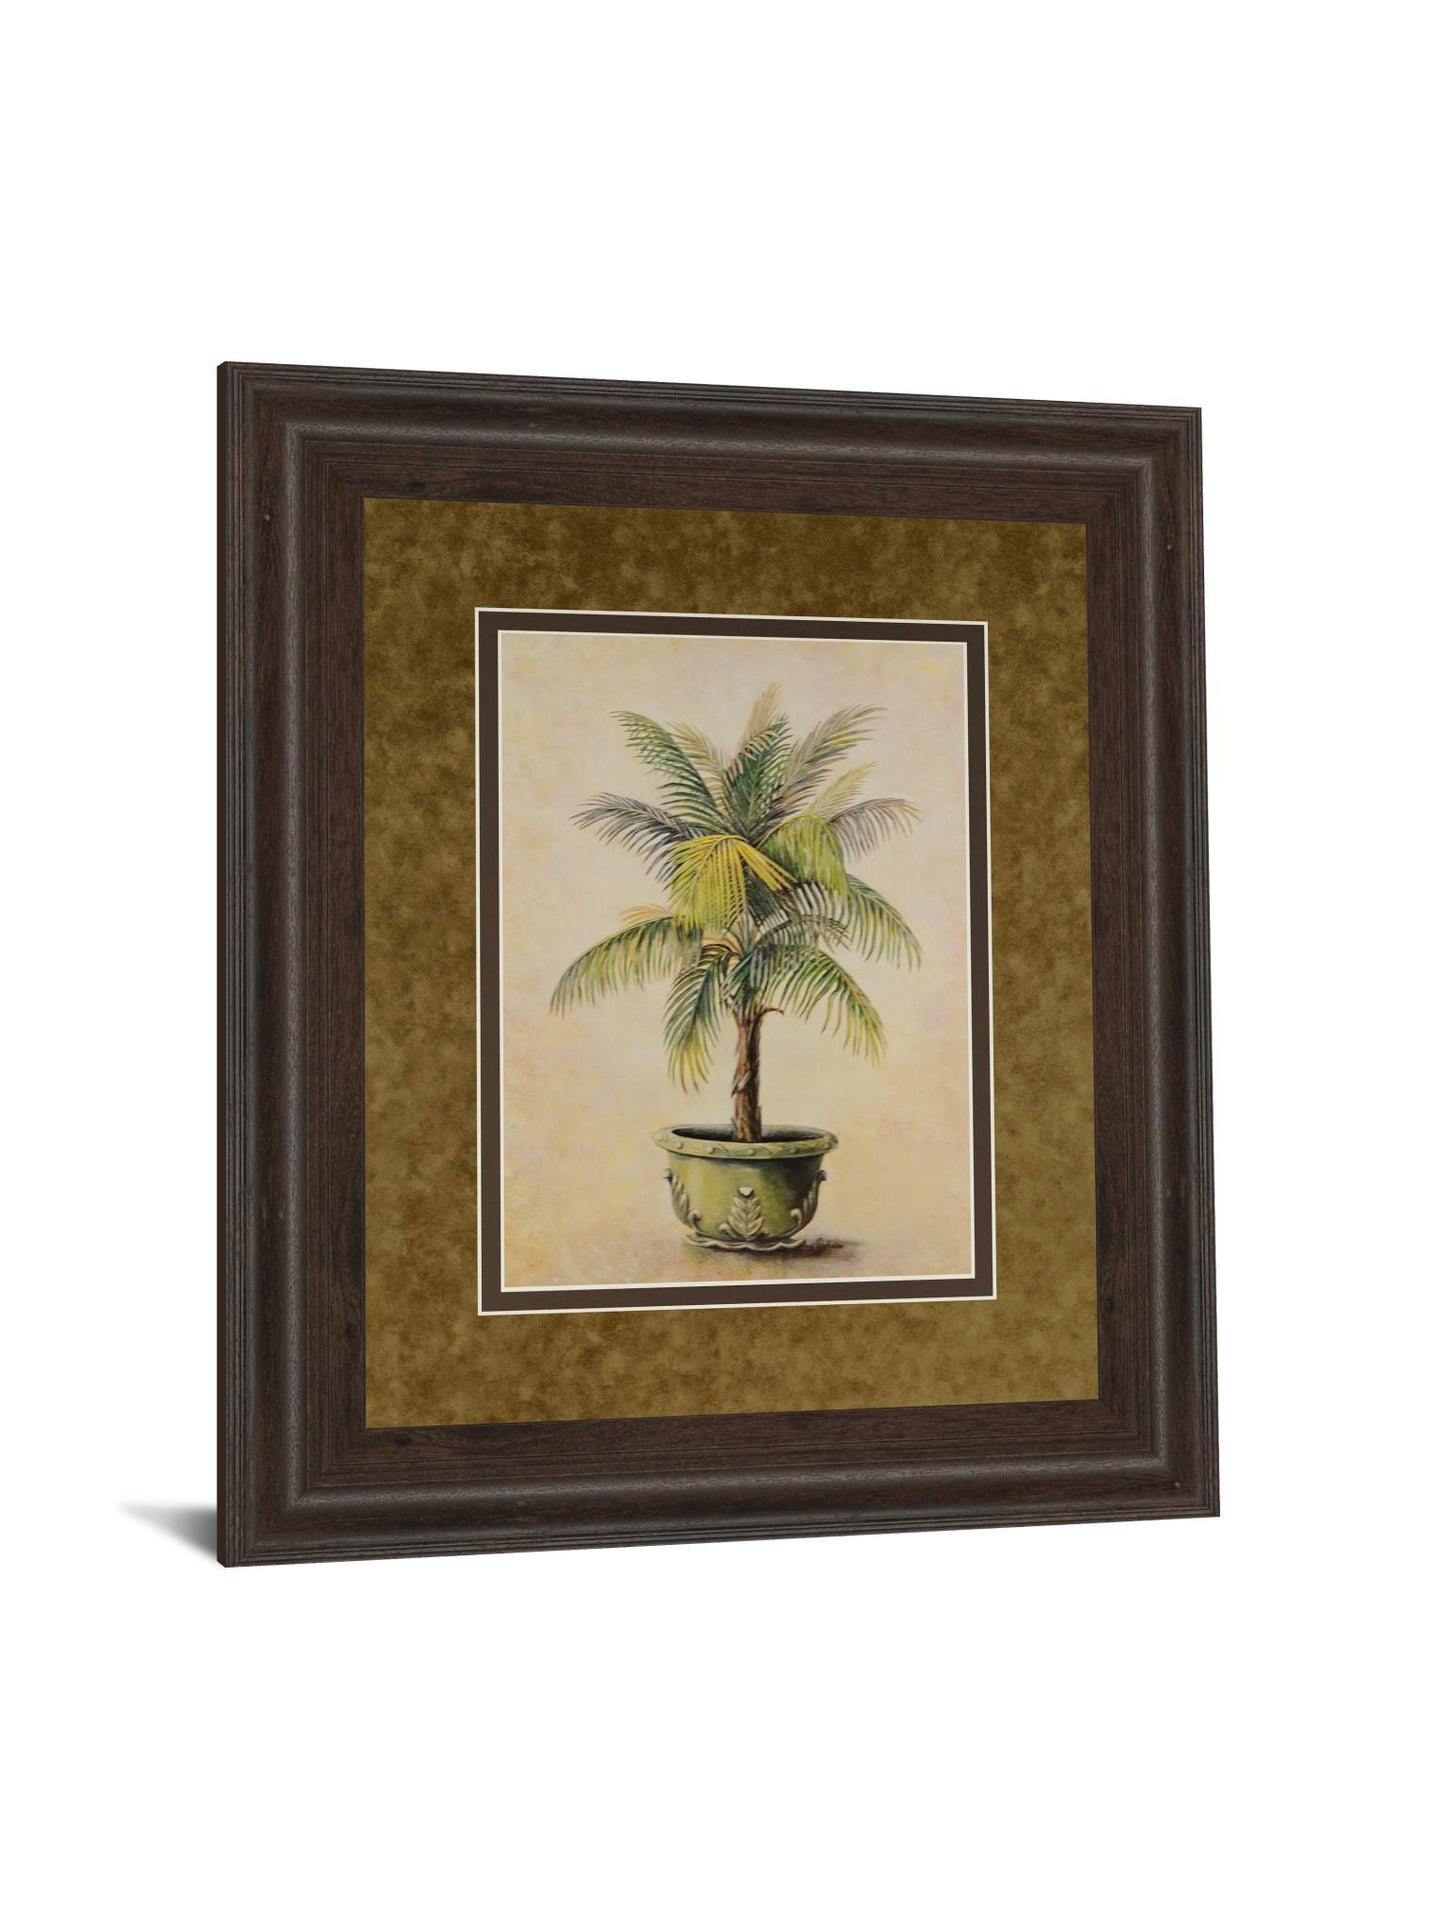 Potted Palm I - Framed Print Wall Art - Green